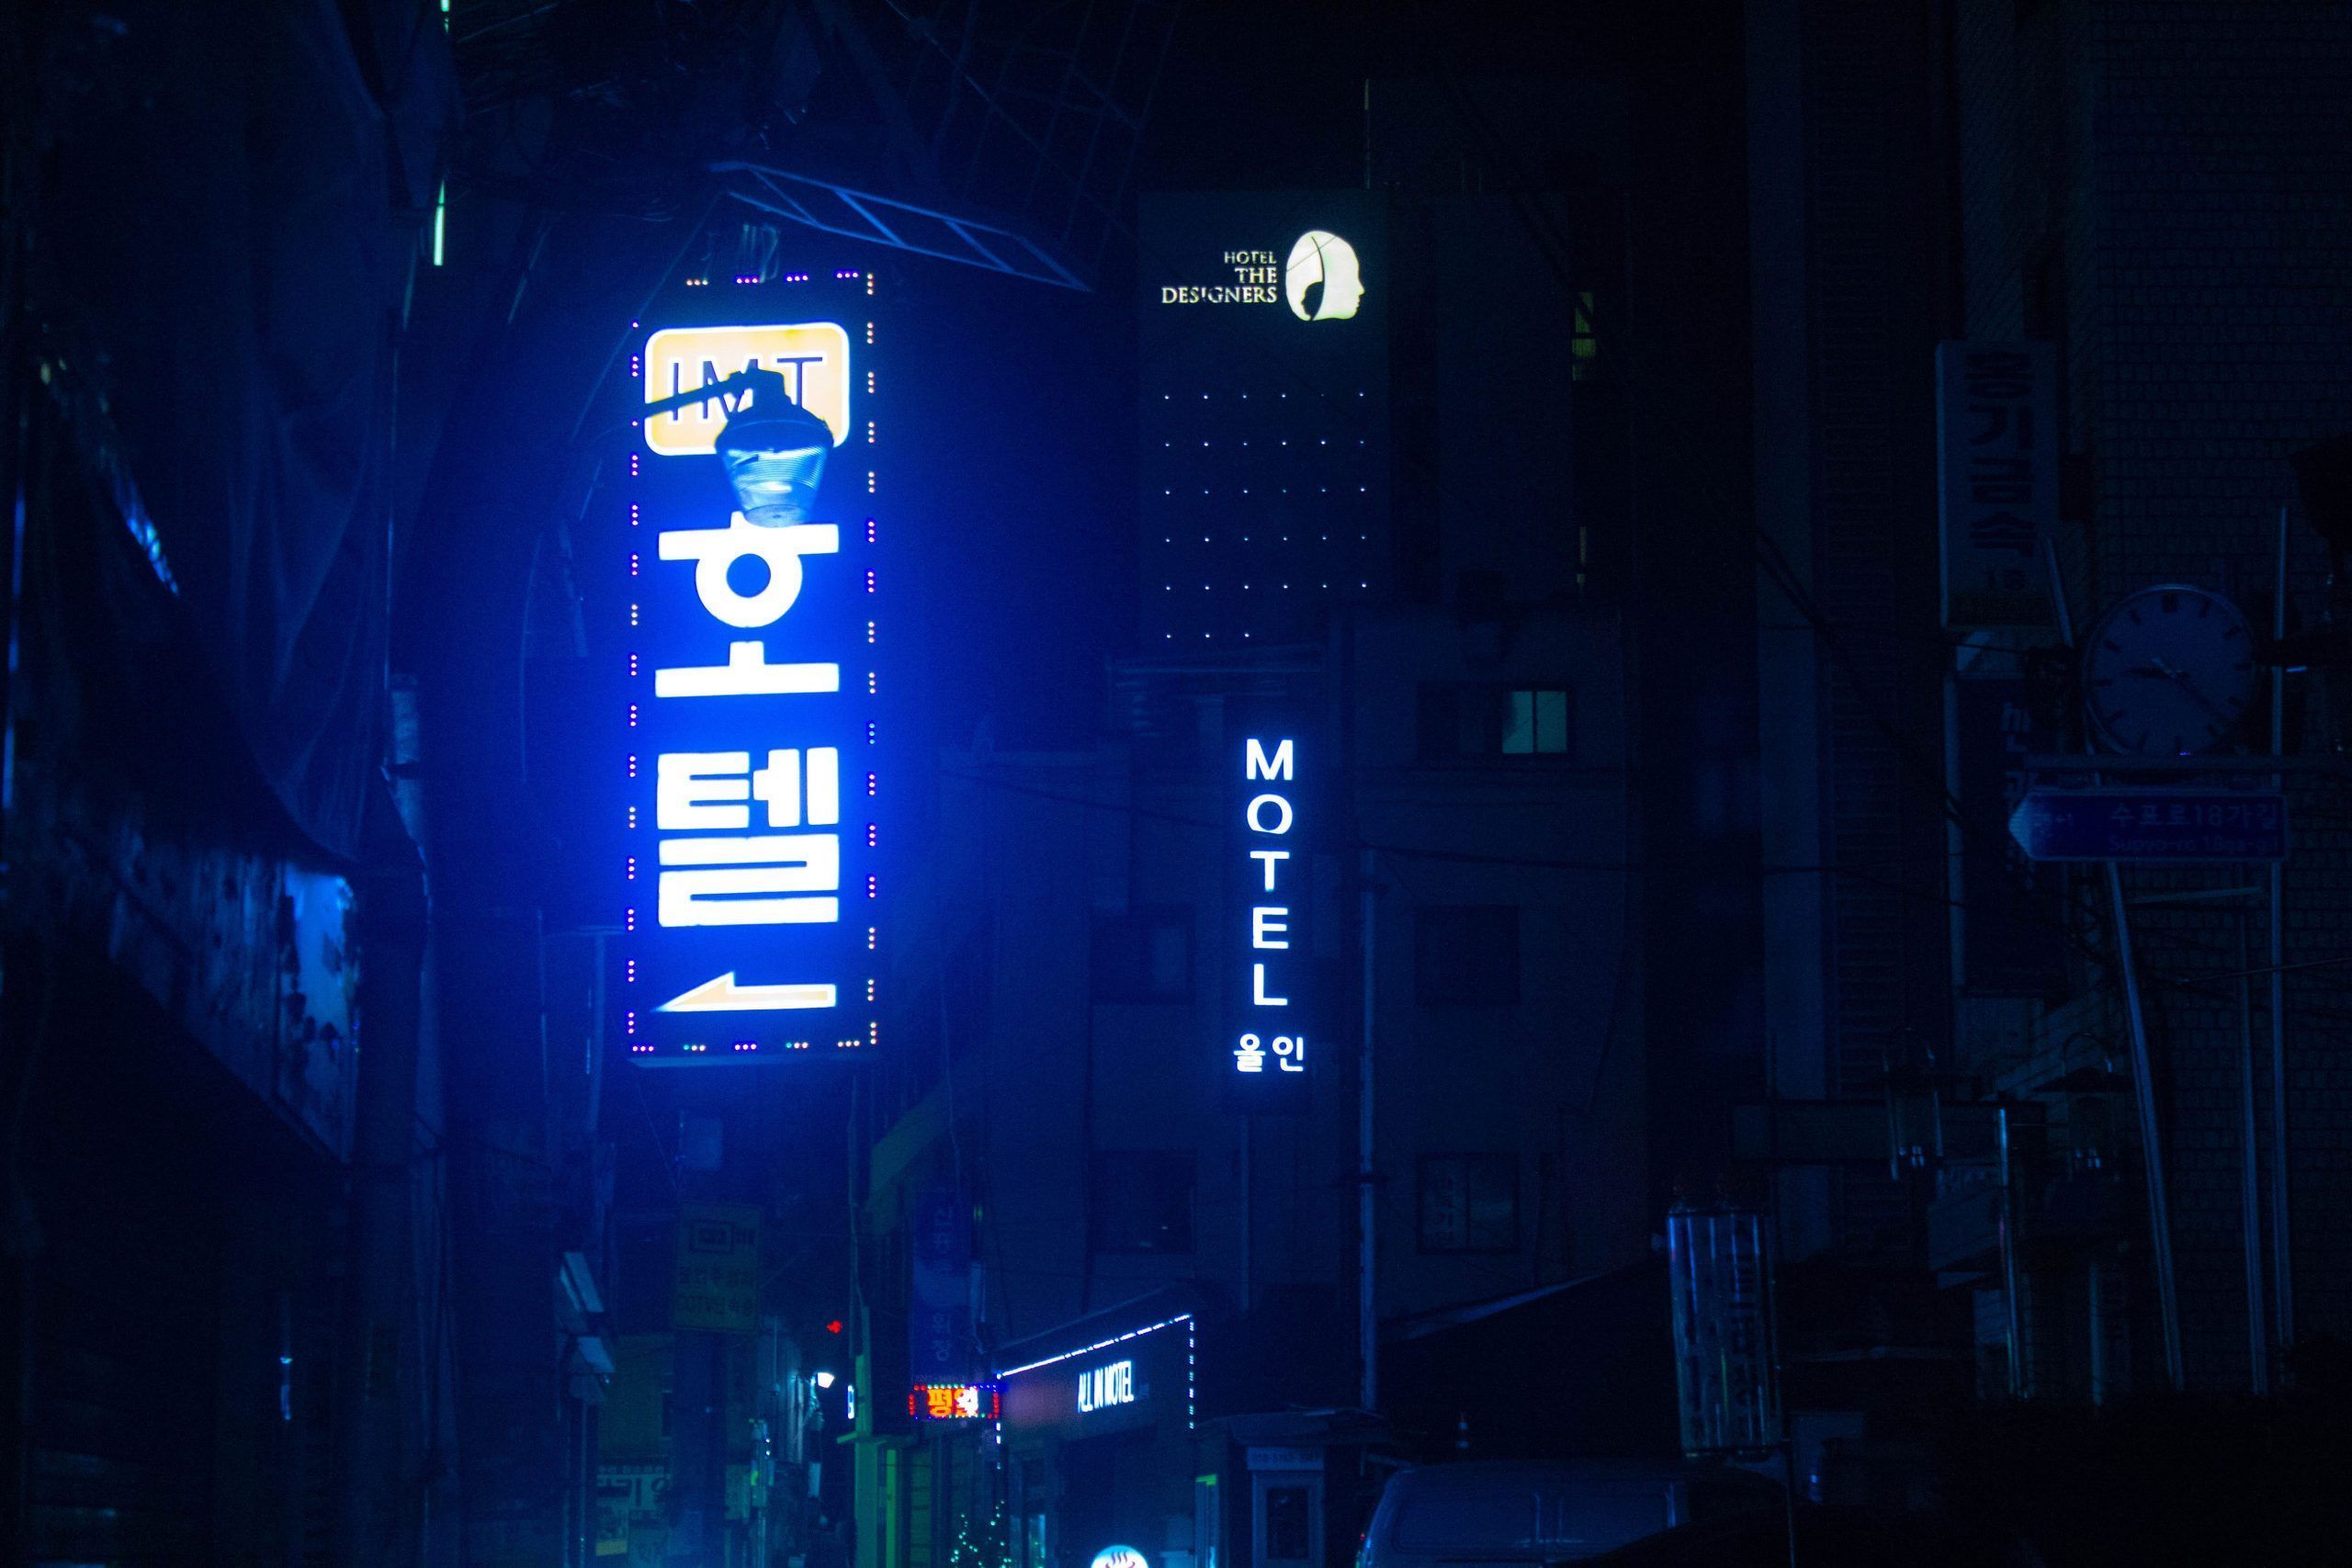 A city street with neon signs at night - Cyberpunk, Seoul